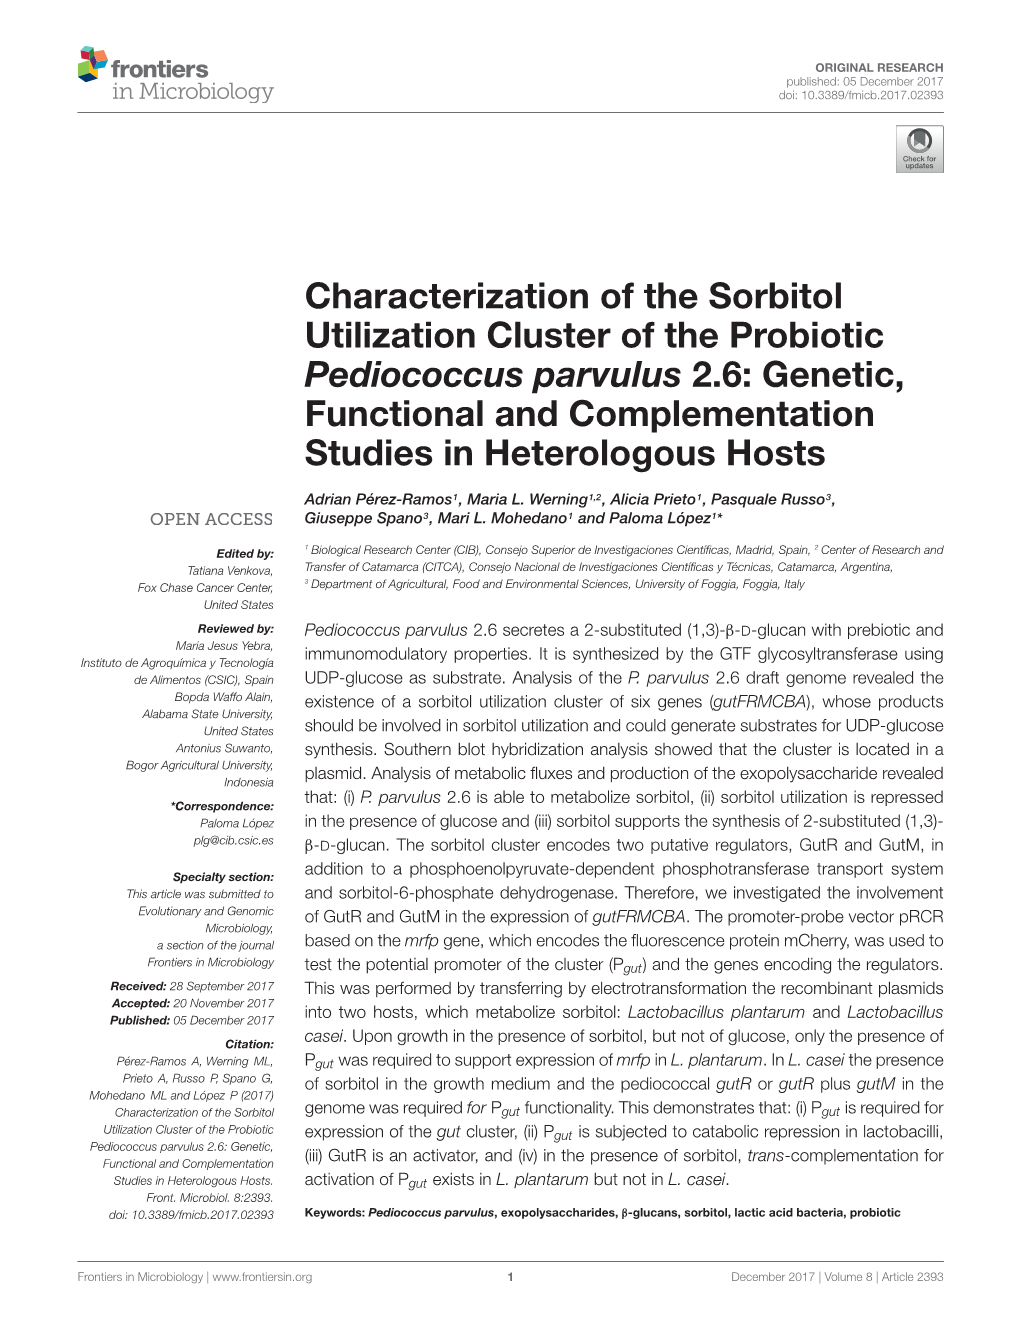 Characterization of the Sorbitol Utilization Cluster of the Probiotic Pediococcus Parvulus 2.6: Genetic, Functional and Complementation Studies in Heterologous Hosts